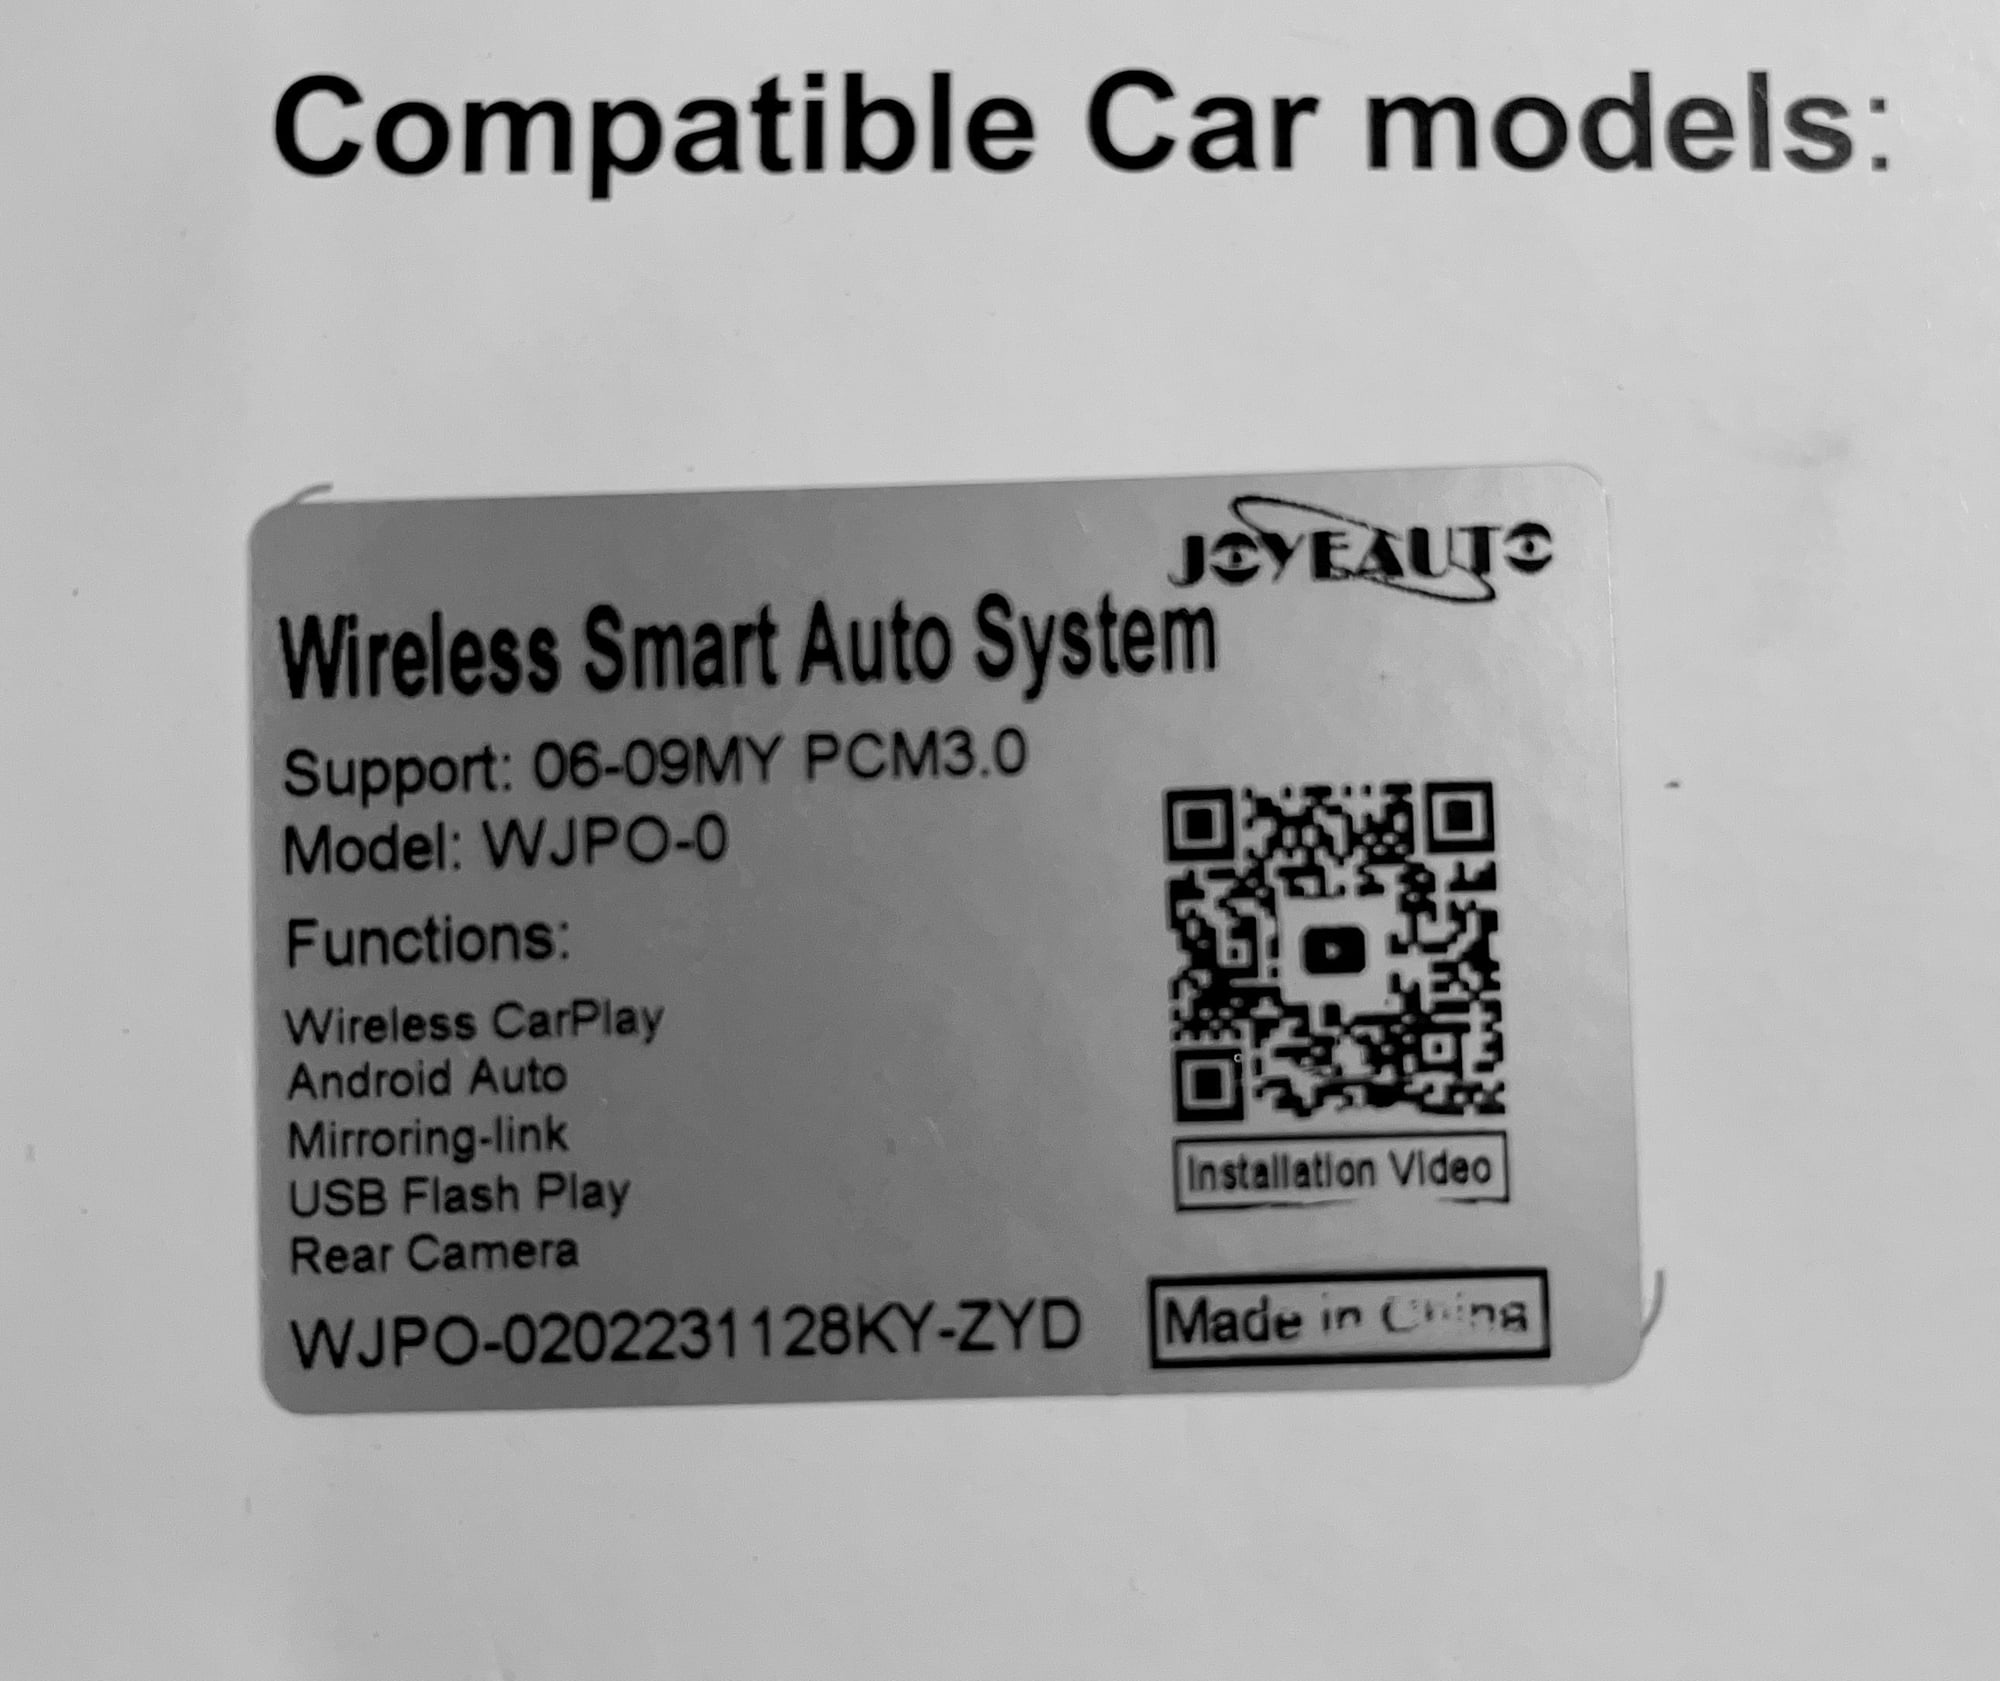 Audio Video/Electronics - New - In Box JoyeAuto Wireless Apple CarPlay/Android Auto Module - for PCM 3.0 - New - Chesterfield, VA 23838, United States